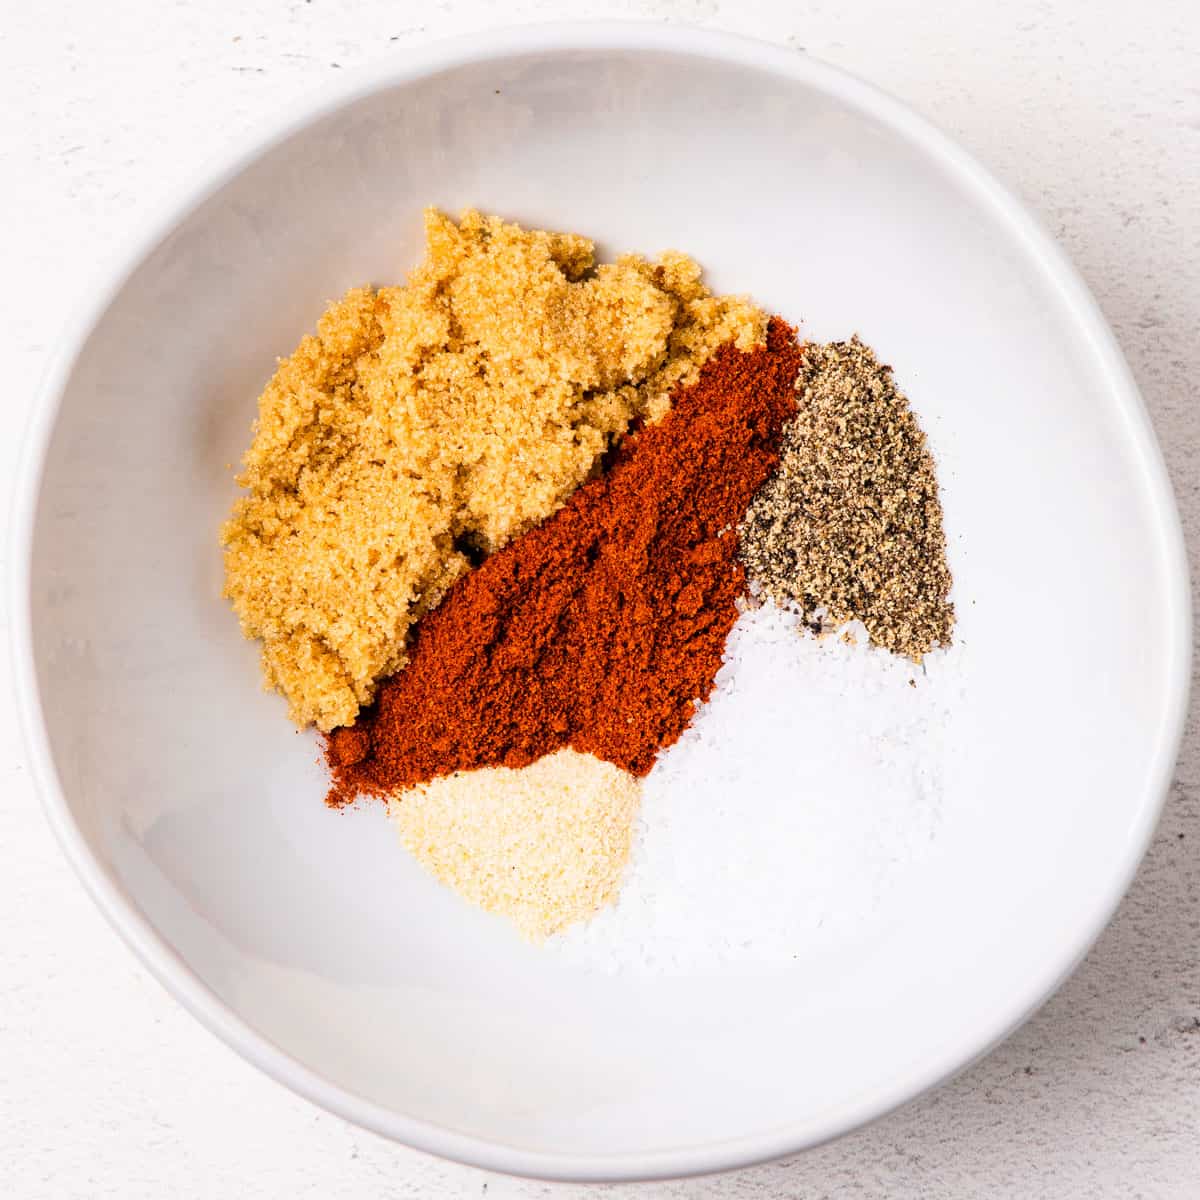 Spices for homemade BBQ rub shown in a small bowl.